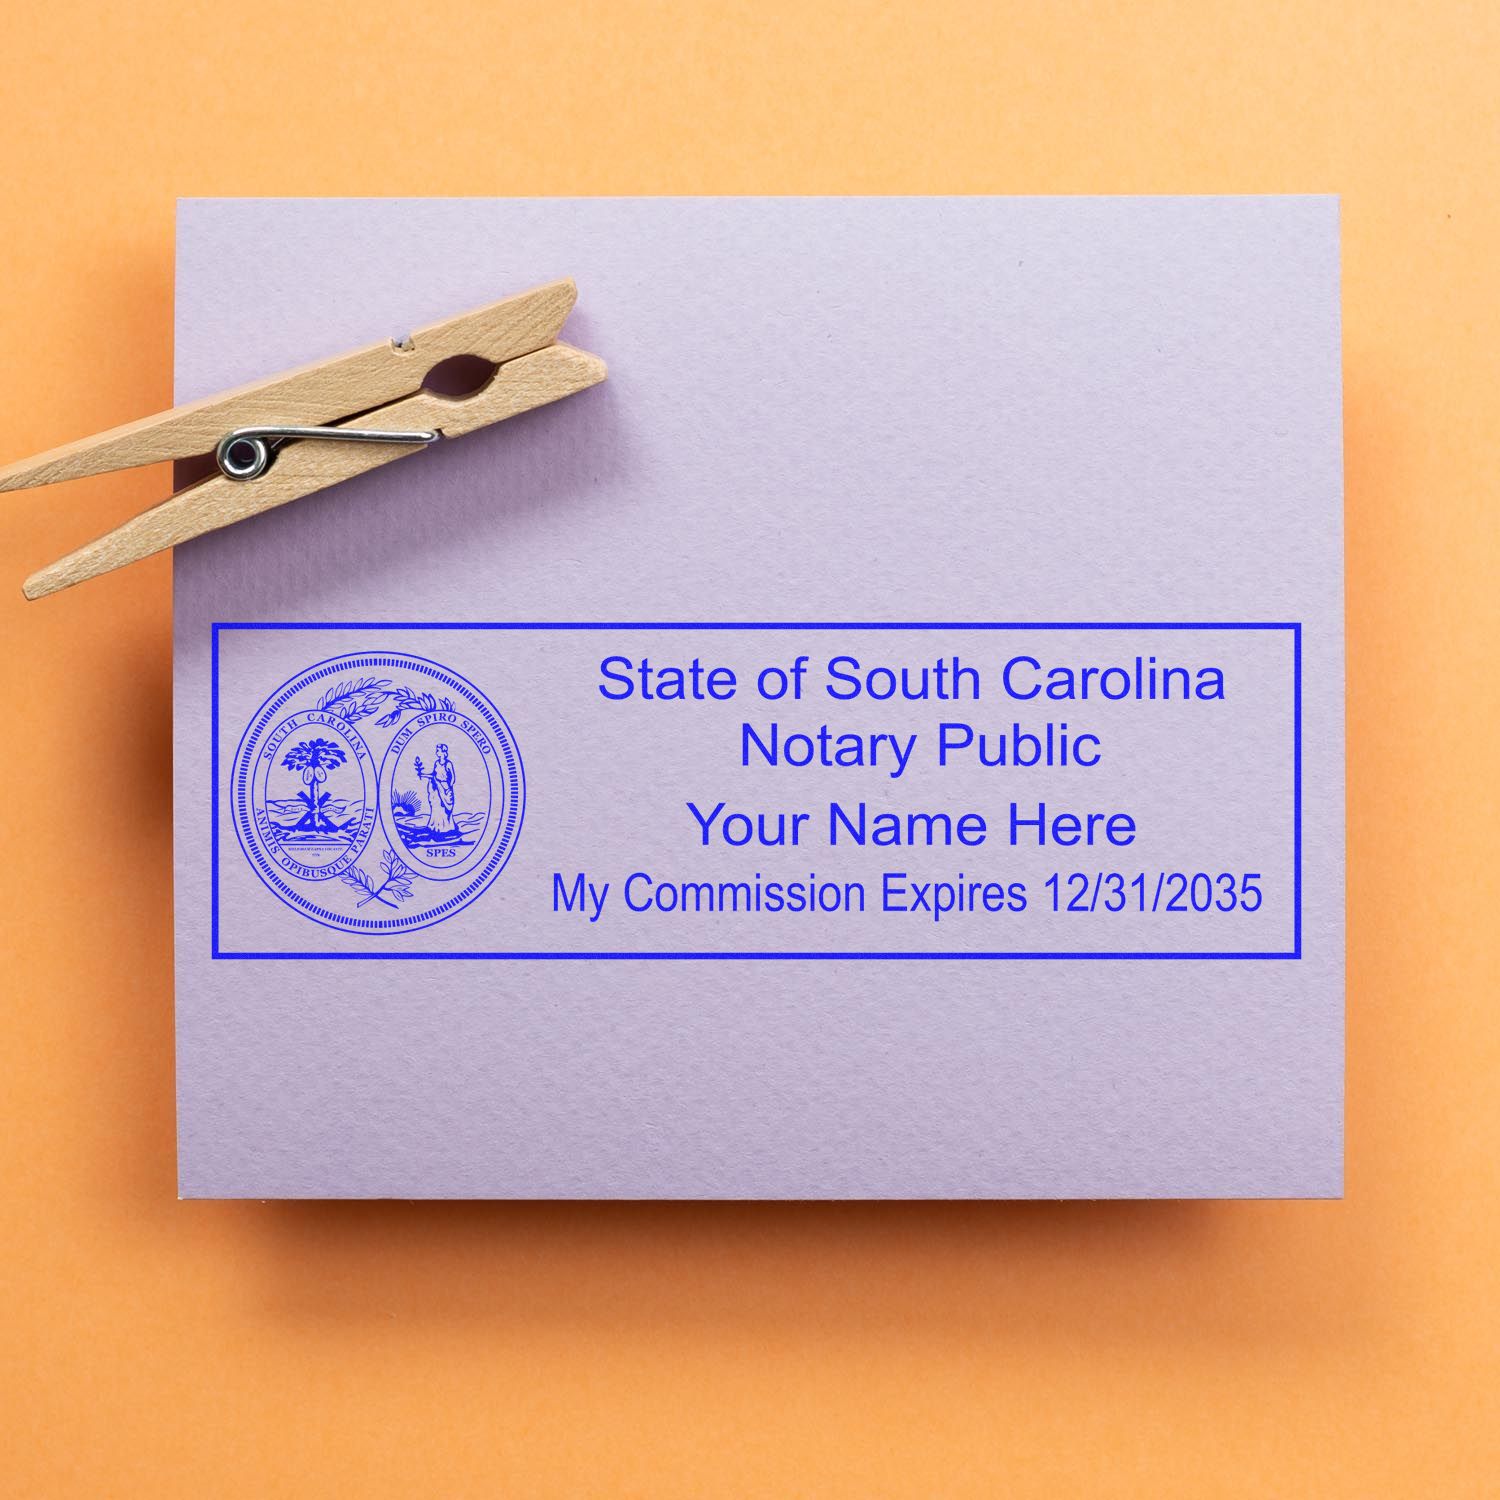 Slim Pre-Inked State Seal Notary Stamp for South Carolina in use photo showing a stamped imprint of the Slim Pre-Inked State Seal Notary Stamp for South Carolina